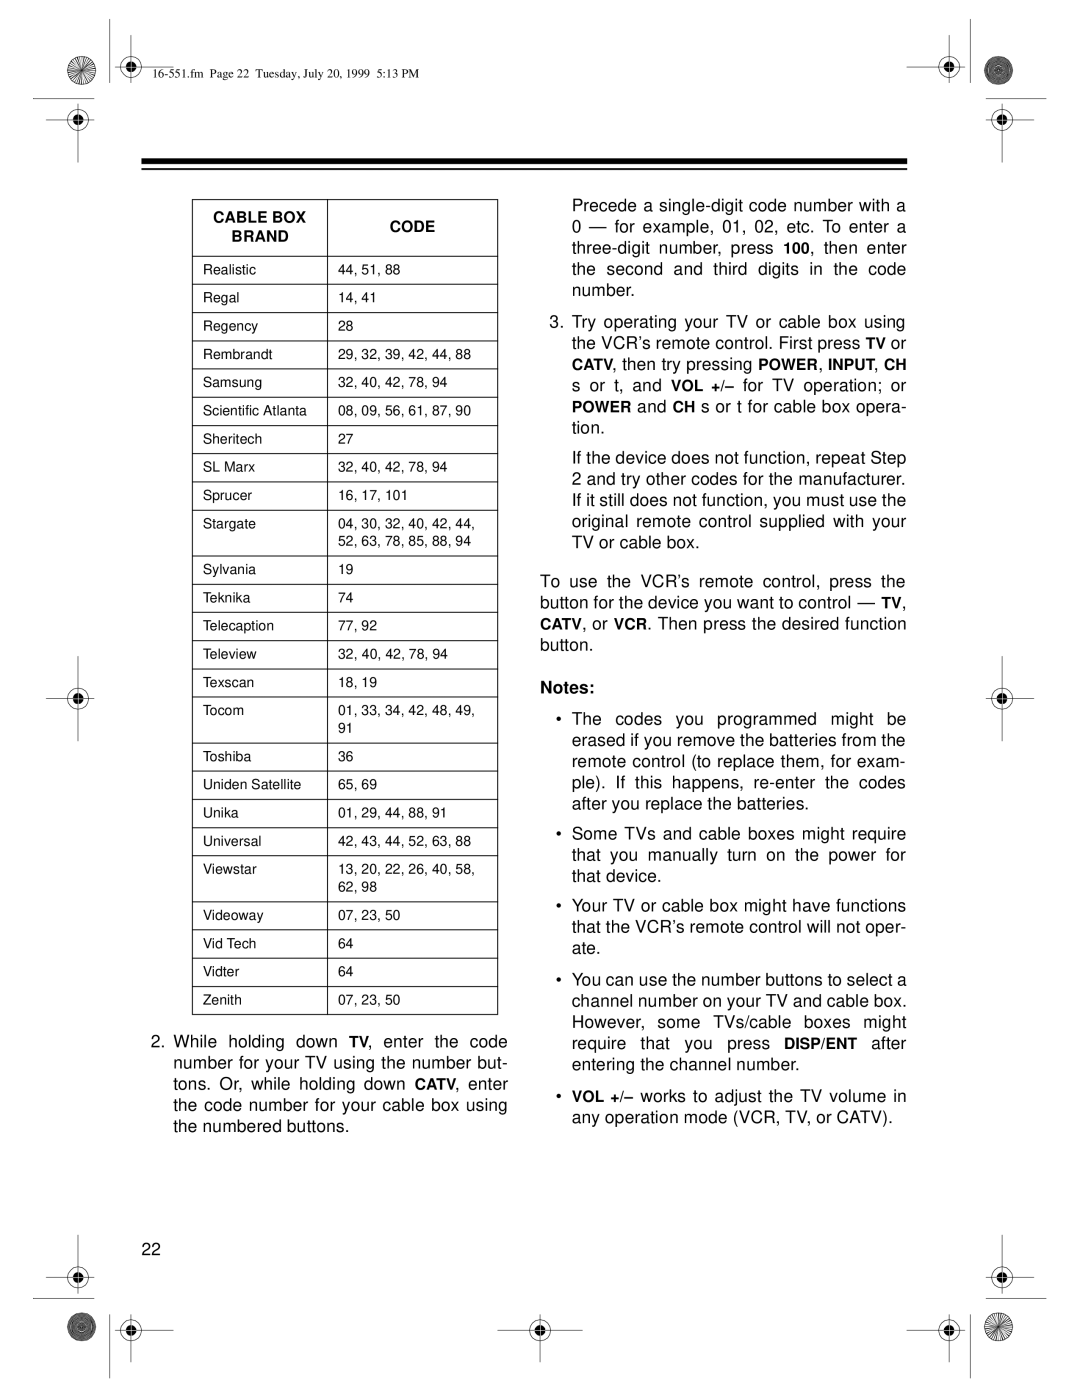 Optimus 63, 114 owner manual fm Page 22 Tuesday, July 20, 1999 513 PM 